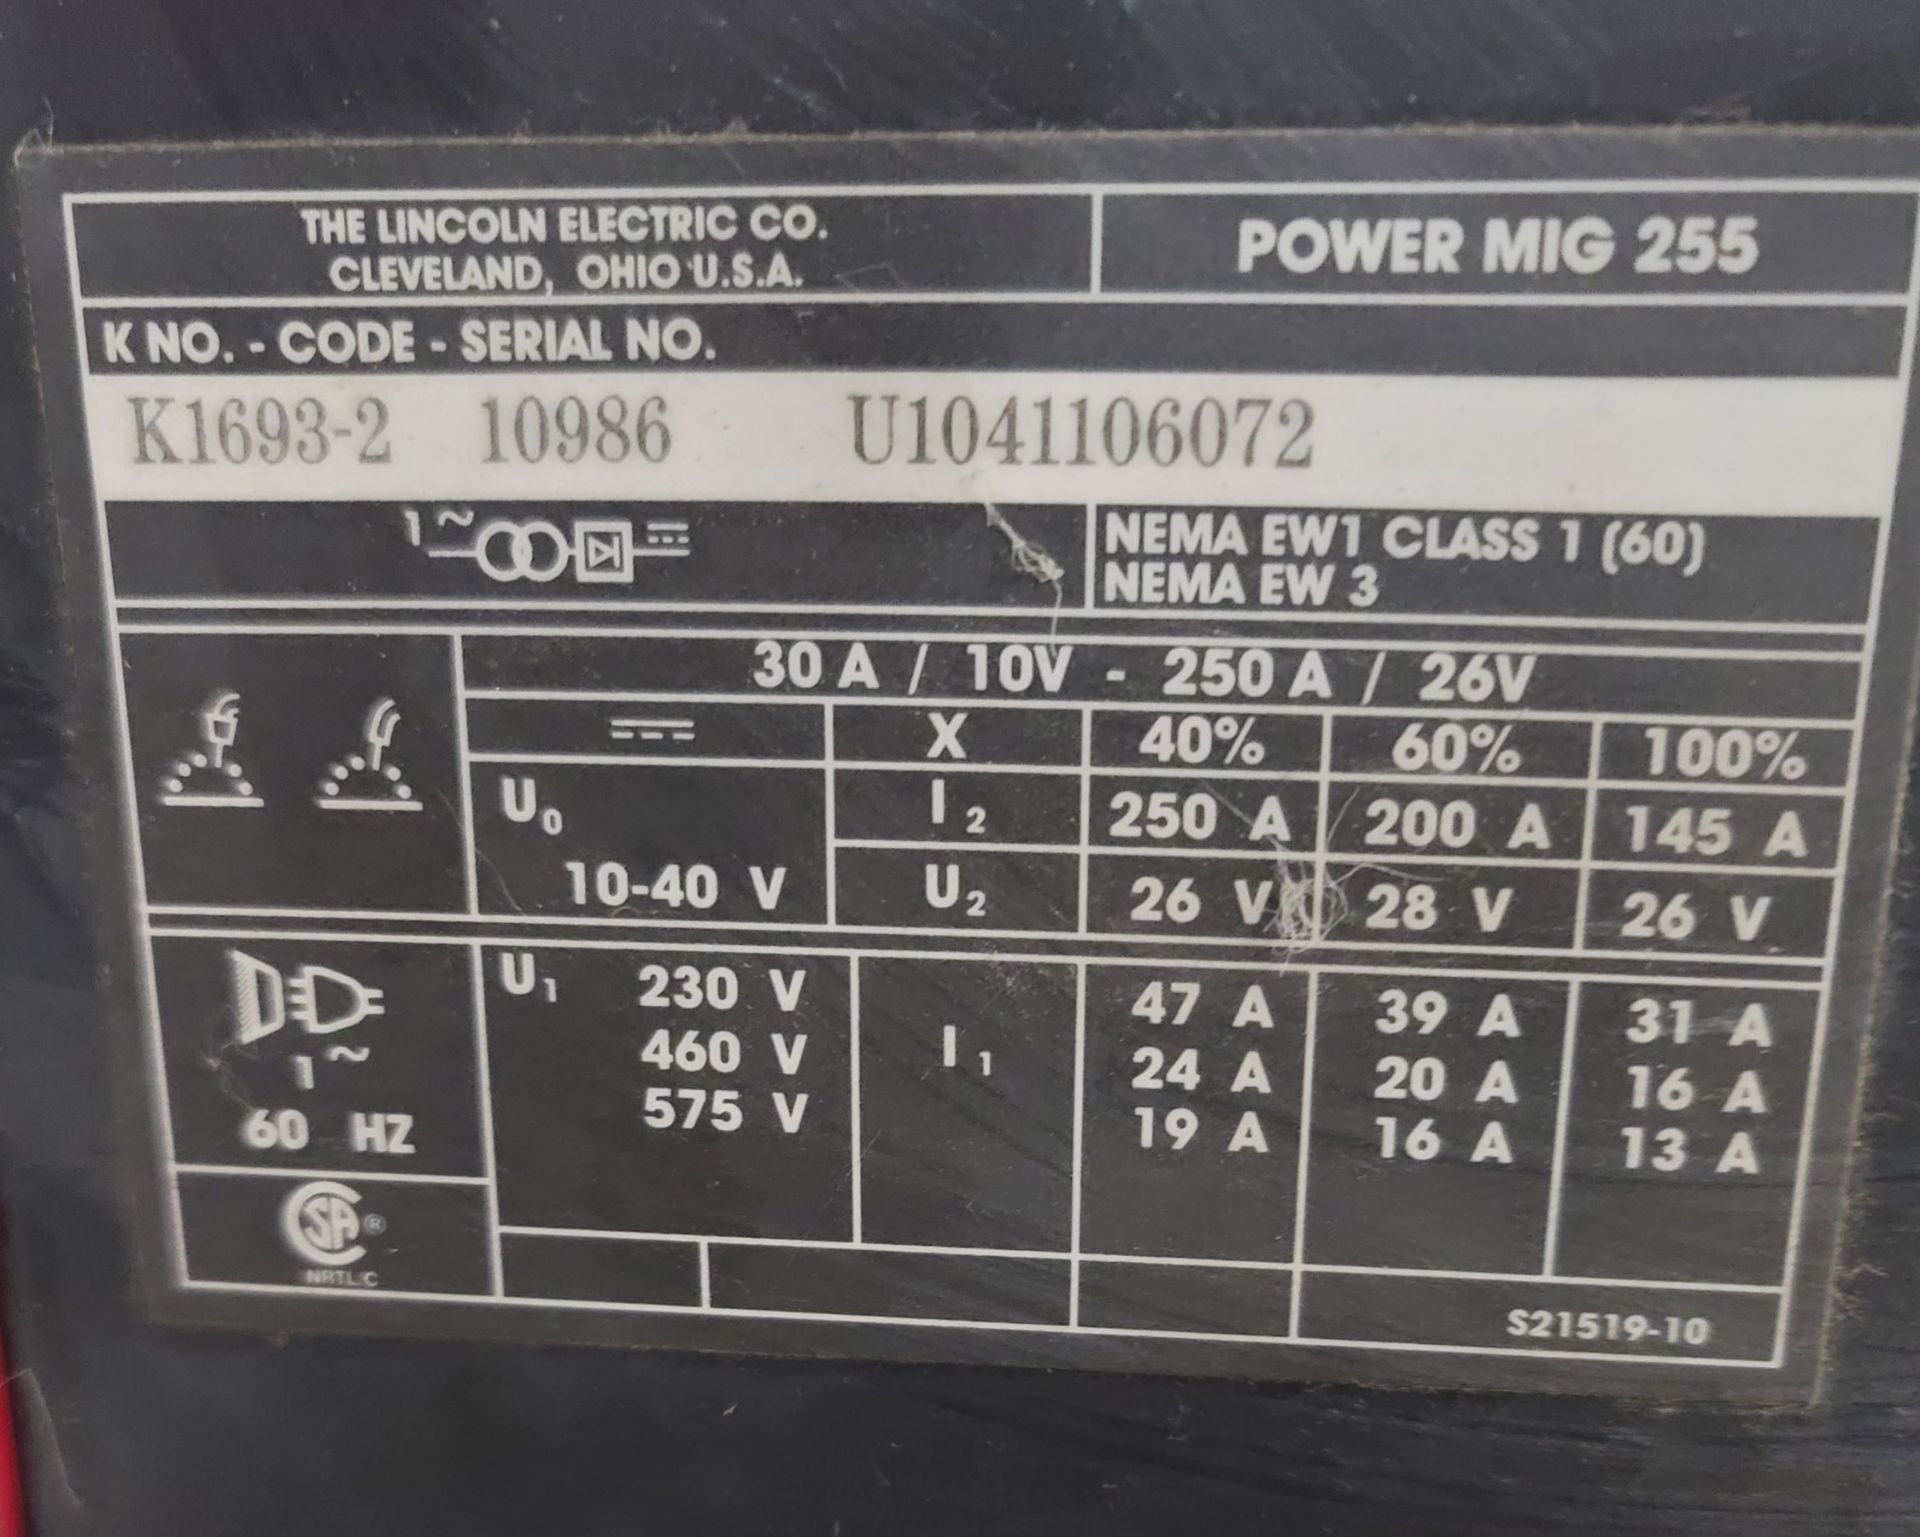 LINCOLN ELECTRIC POWER MIG 255, MODEL K1693-2, S/N 10986 - Image 4 of 4